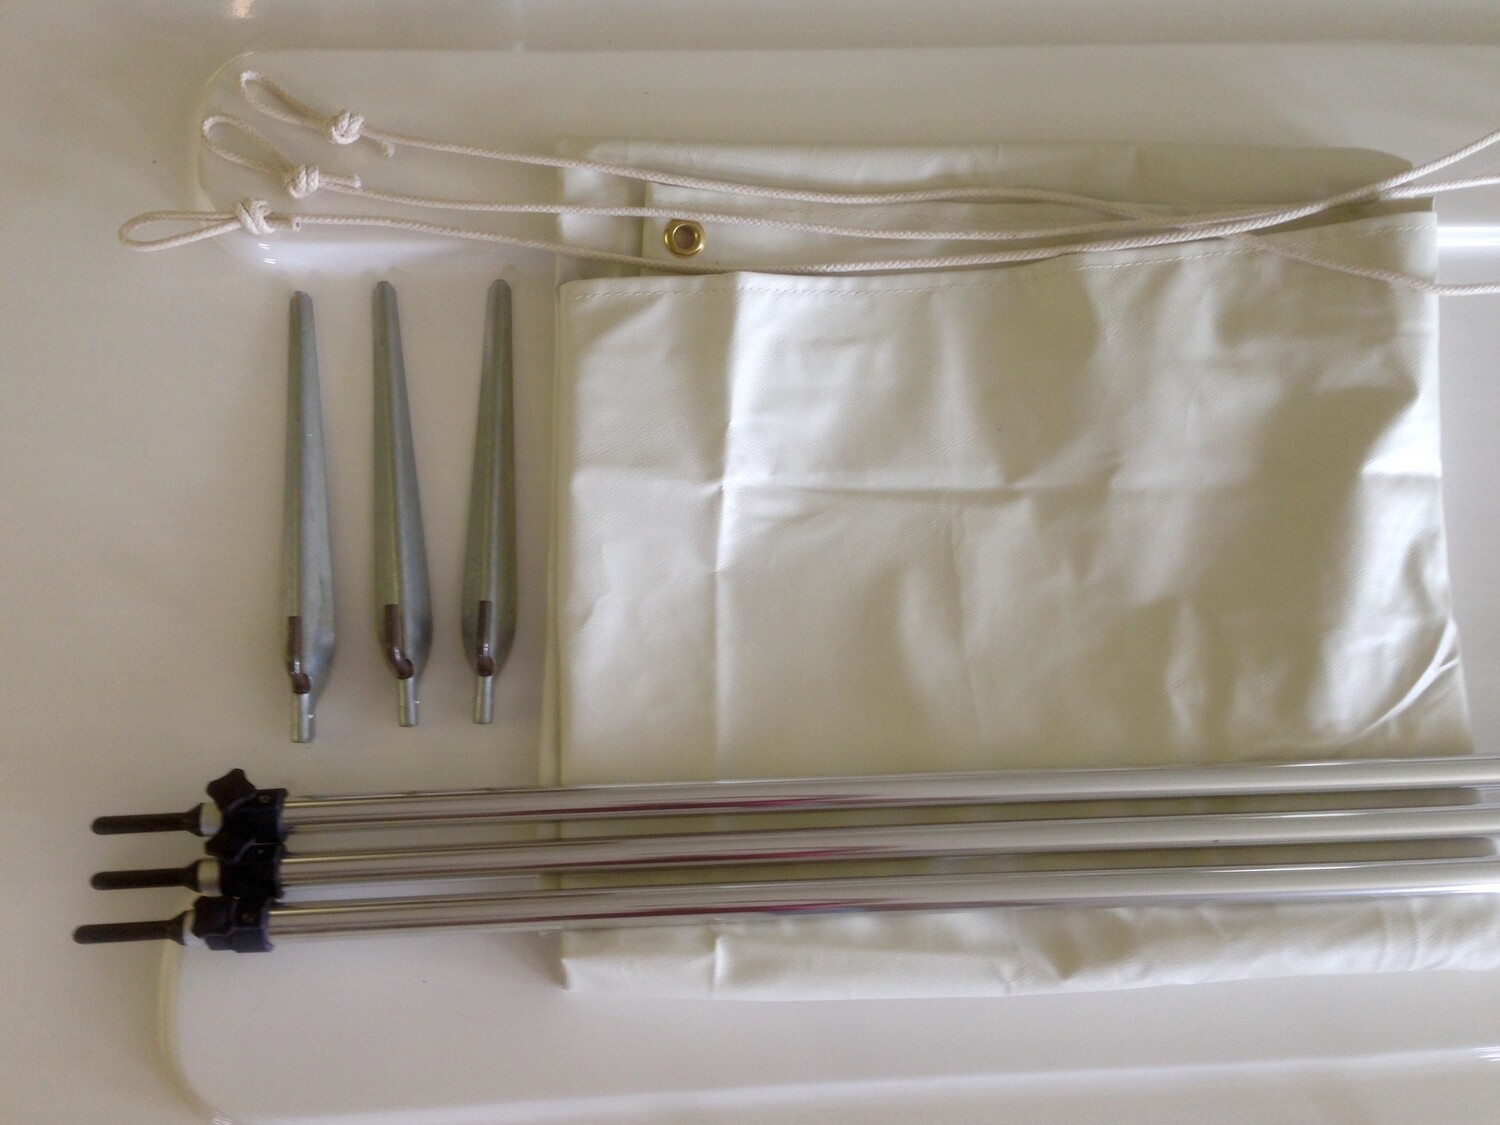 Awning Package Components (Cream color awning discontinued)